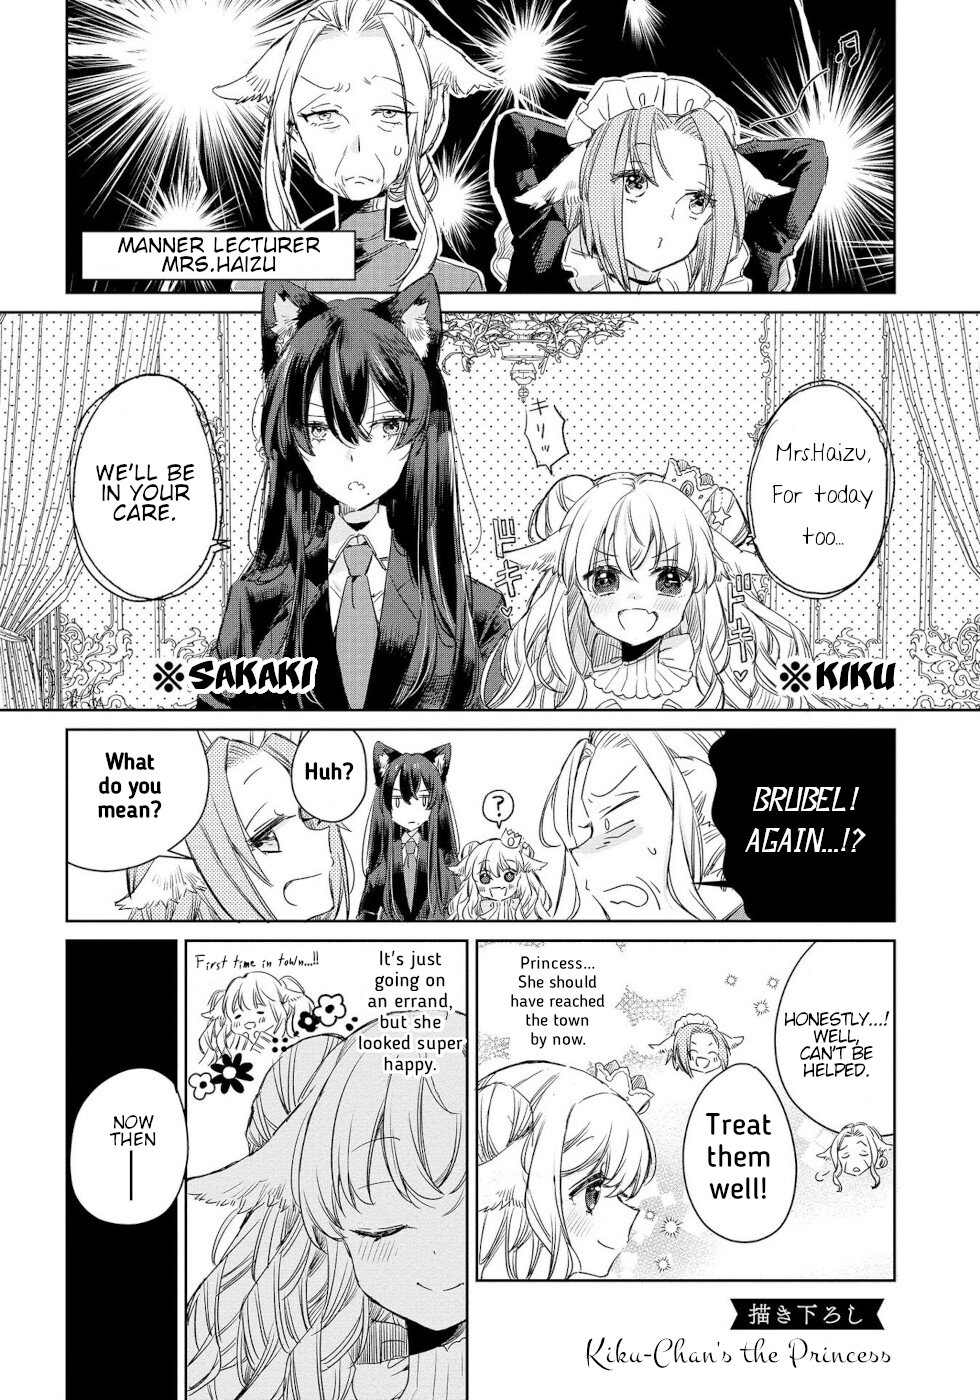 The Sheep Princess In Wolf's Clothing Vol.1 Chapter 6.5: Kiku-Chan's The Princess - Picture 1